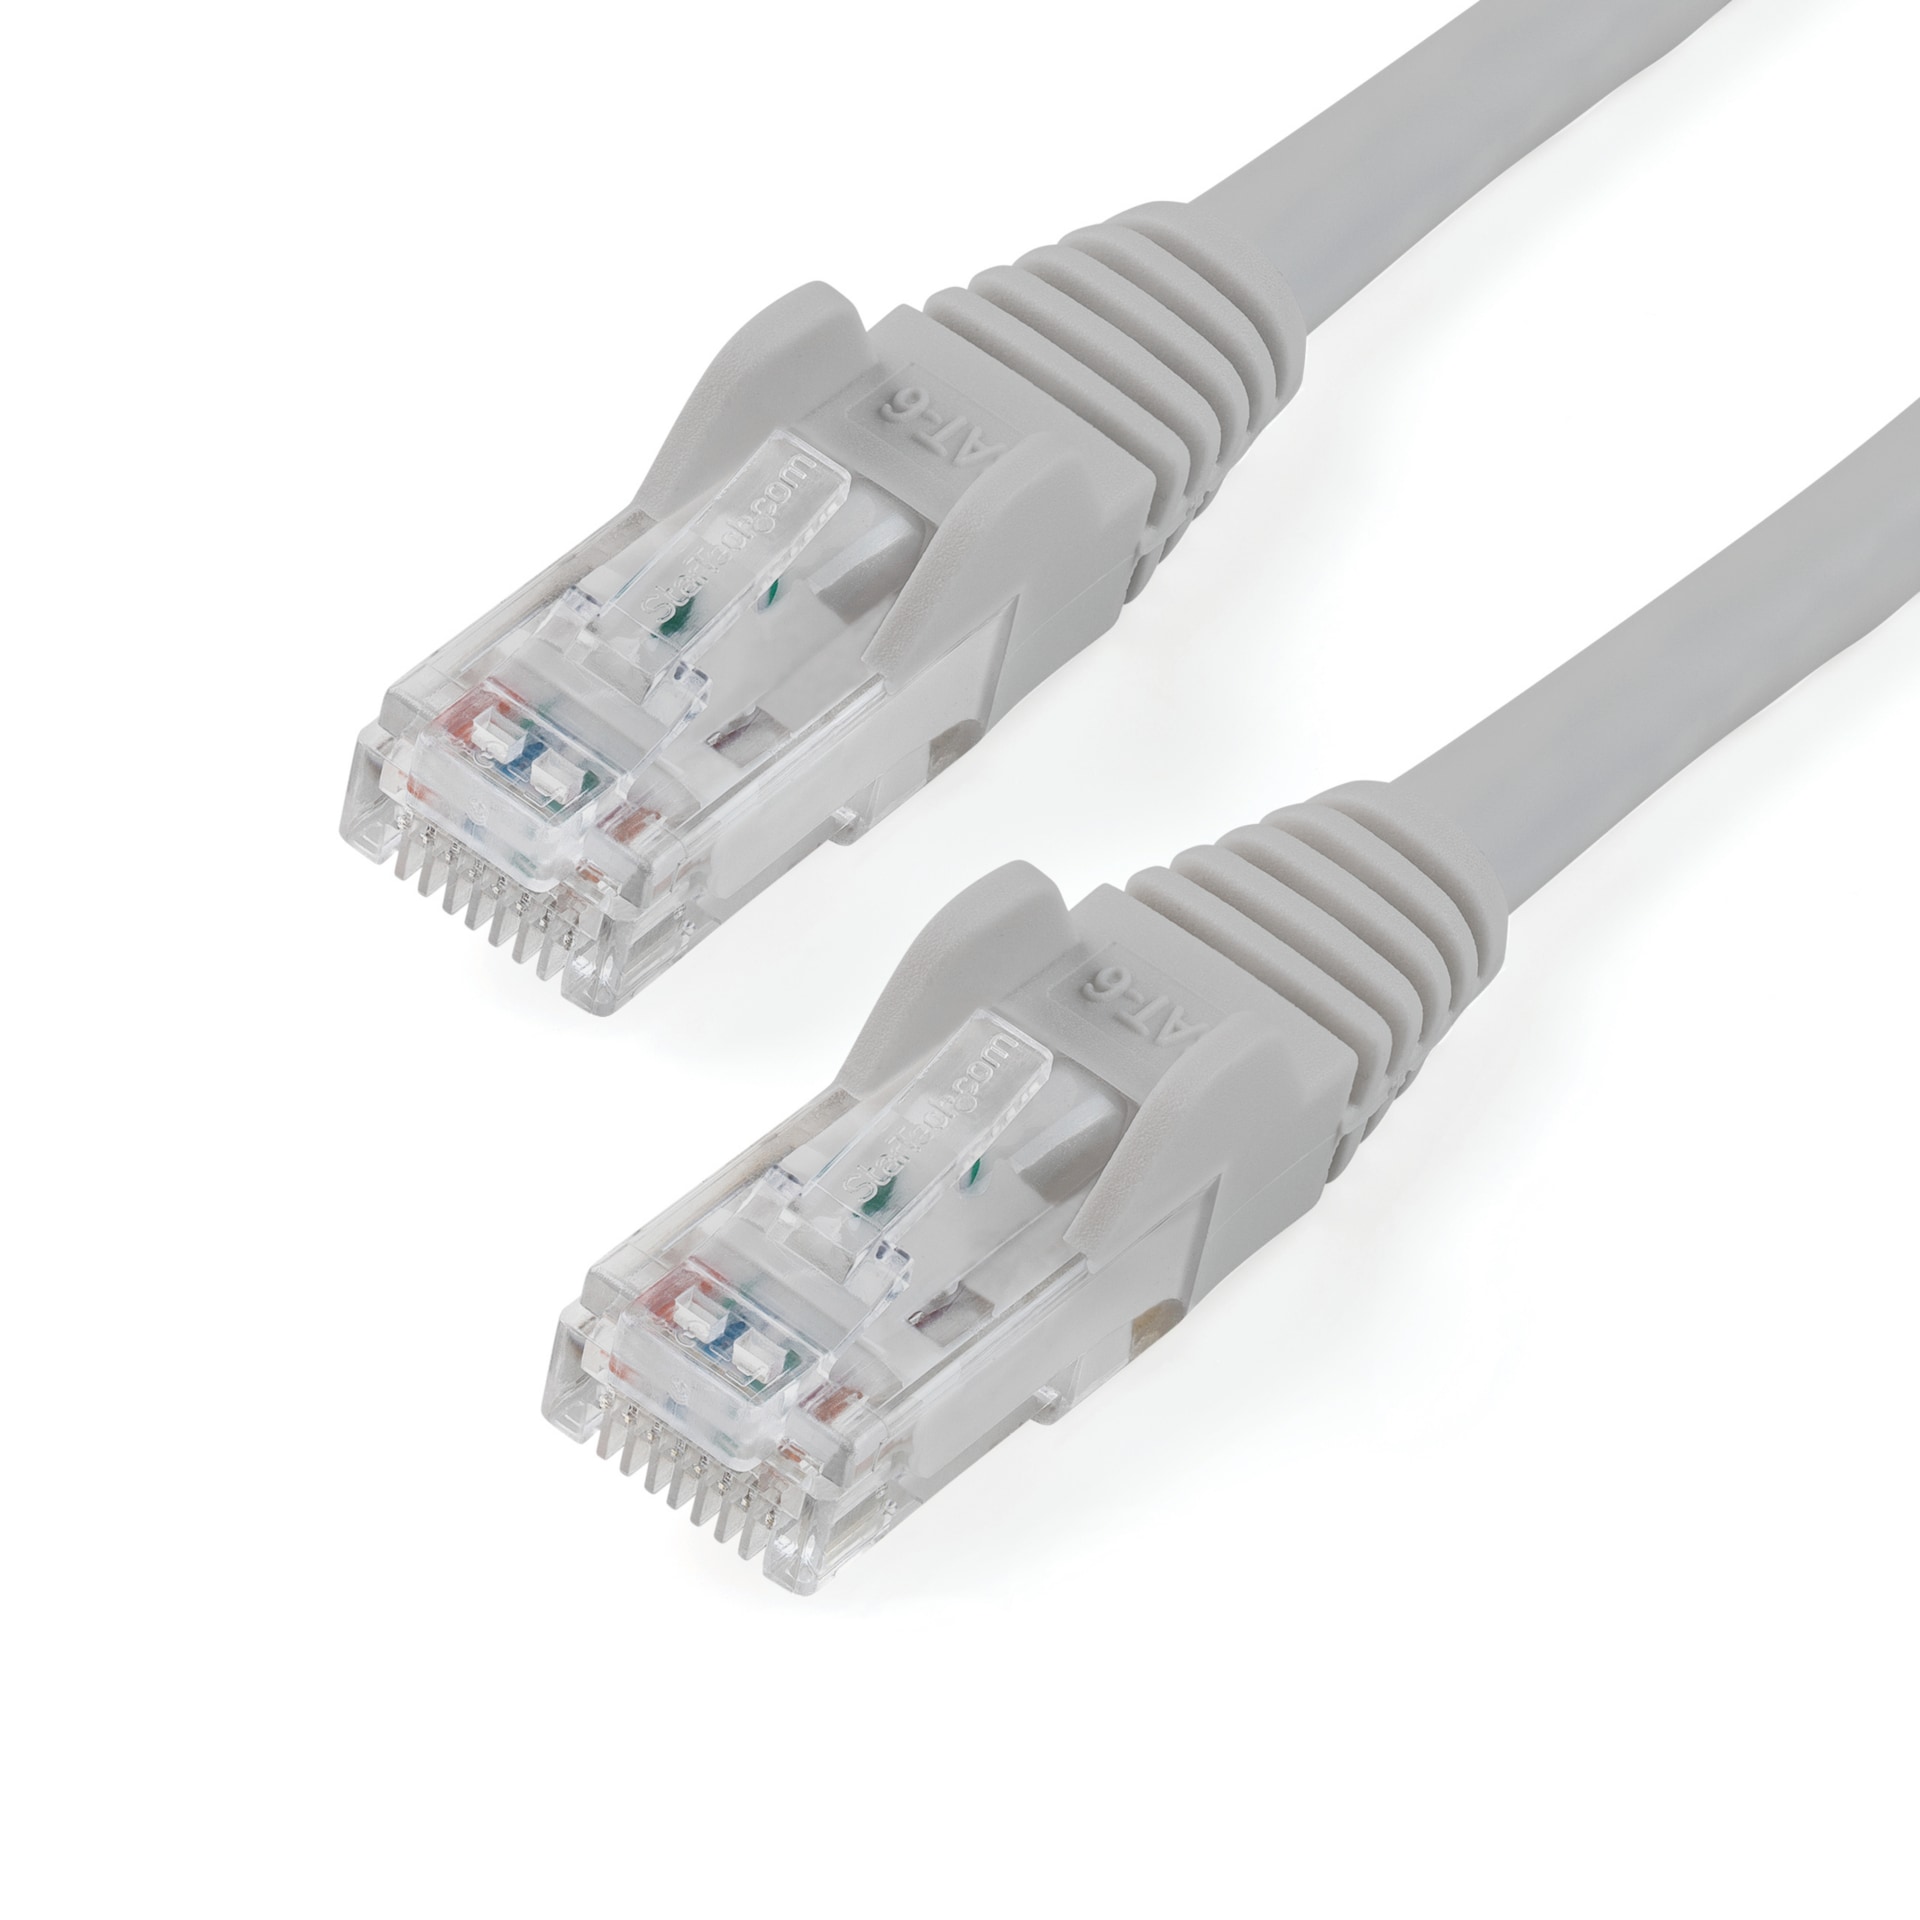 StarTech.com 3ft CAT6 Ethernet Cable - Gray Snagless Gigabit - 100W PoE UTP 650MHz Category 6 Patch Cord UL Certified